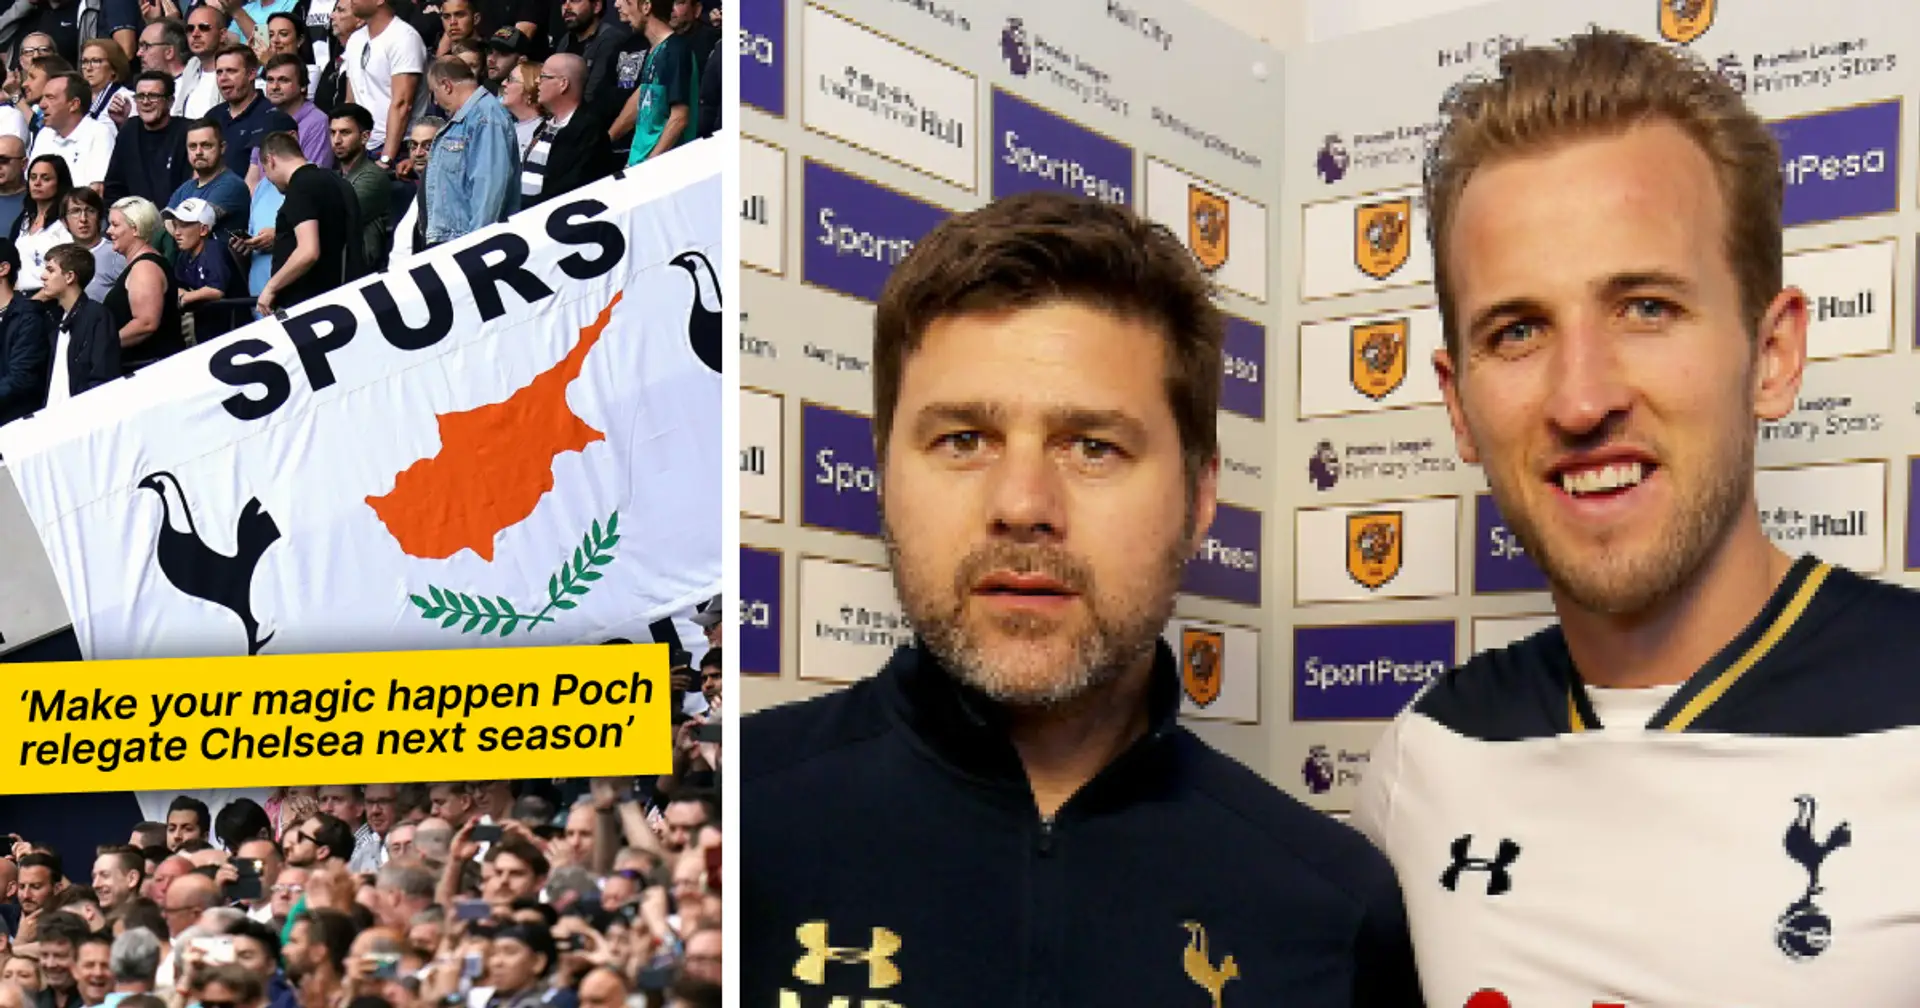 'The enemy. Simple as': Spurs fans react to their hero Mauricio Pochettino becoming Chelsea boss